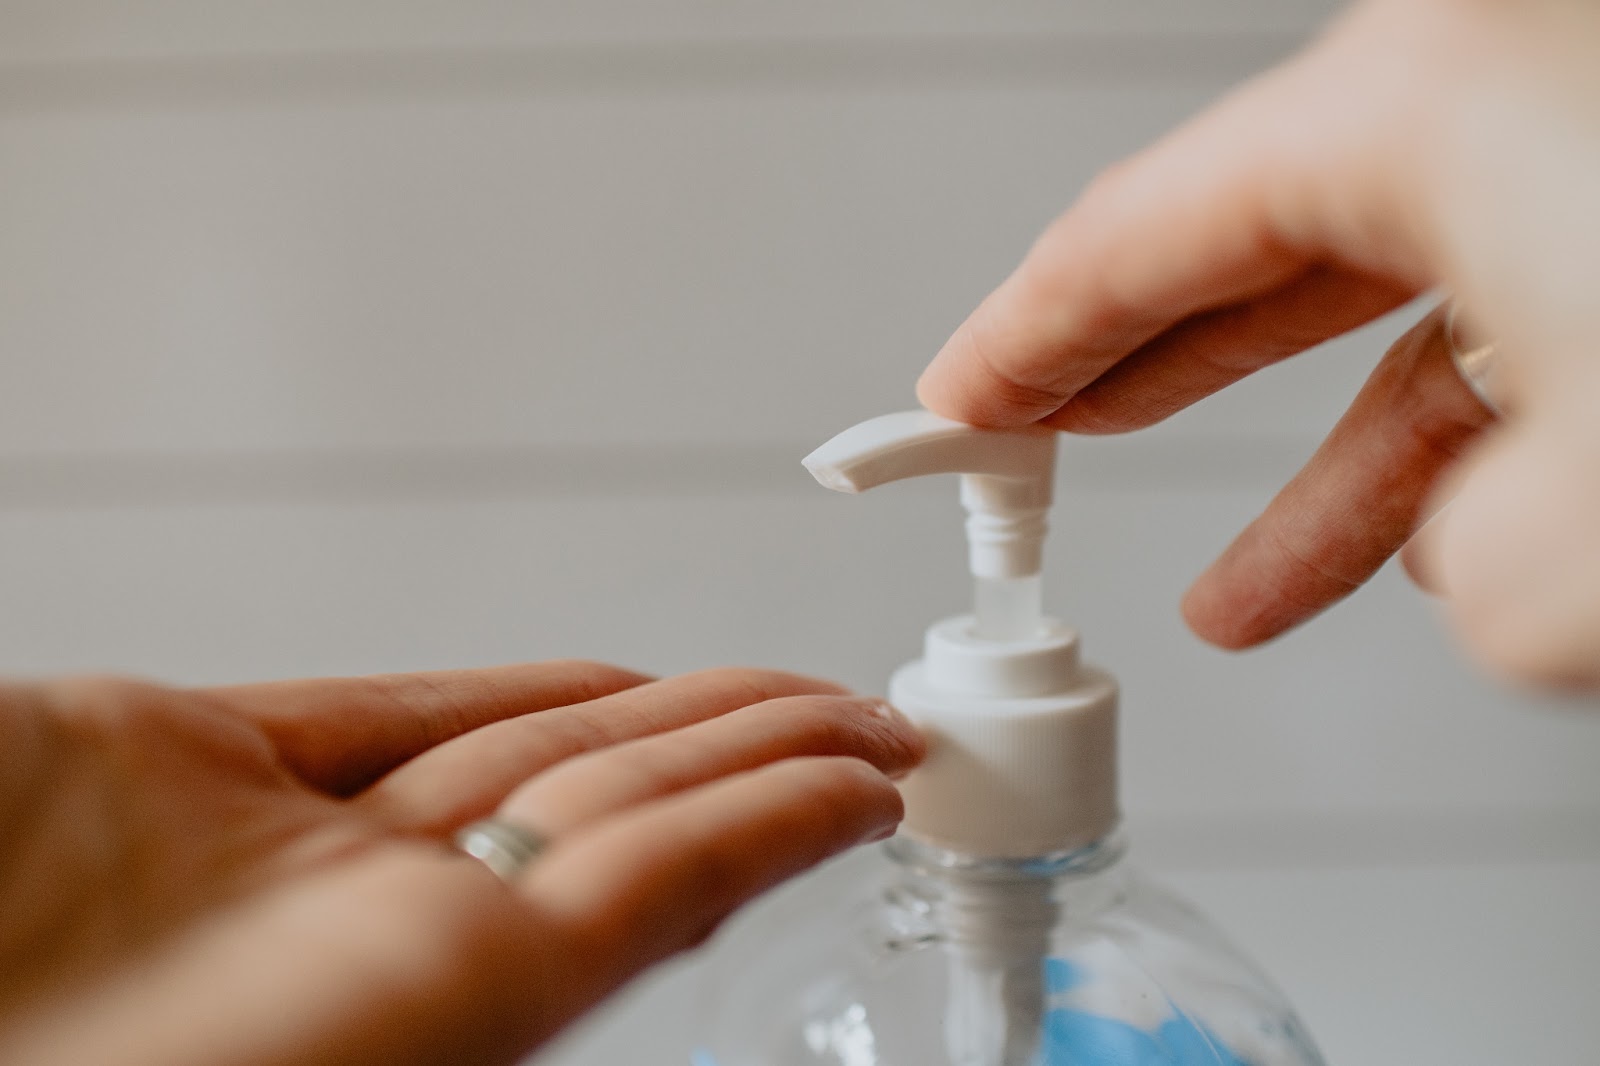 Sanitizing hands can help maintain proper hygiene when traveling. 